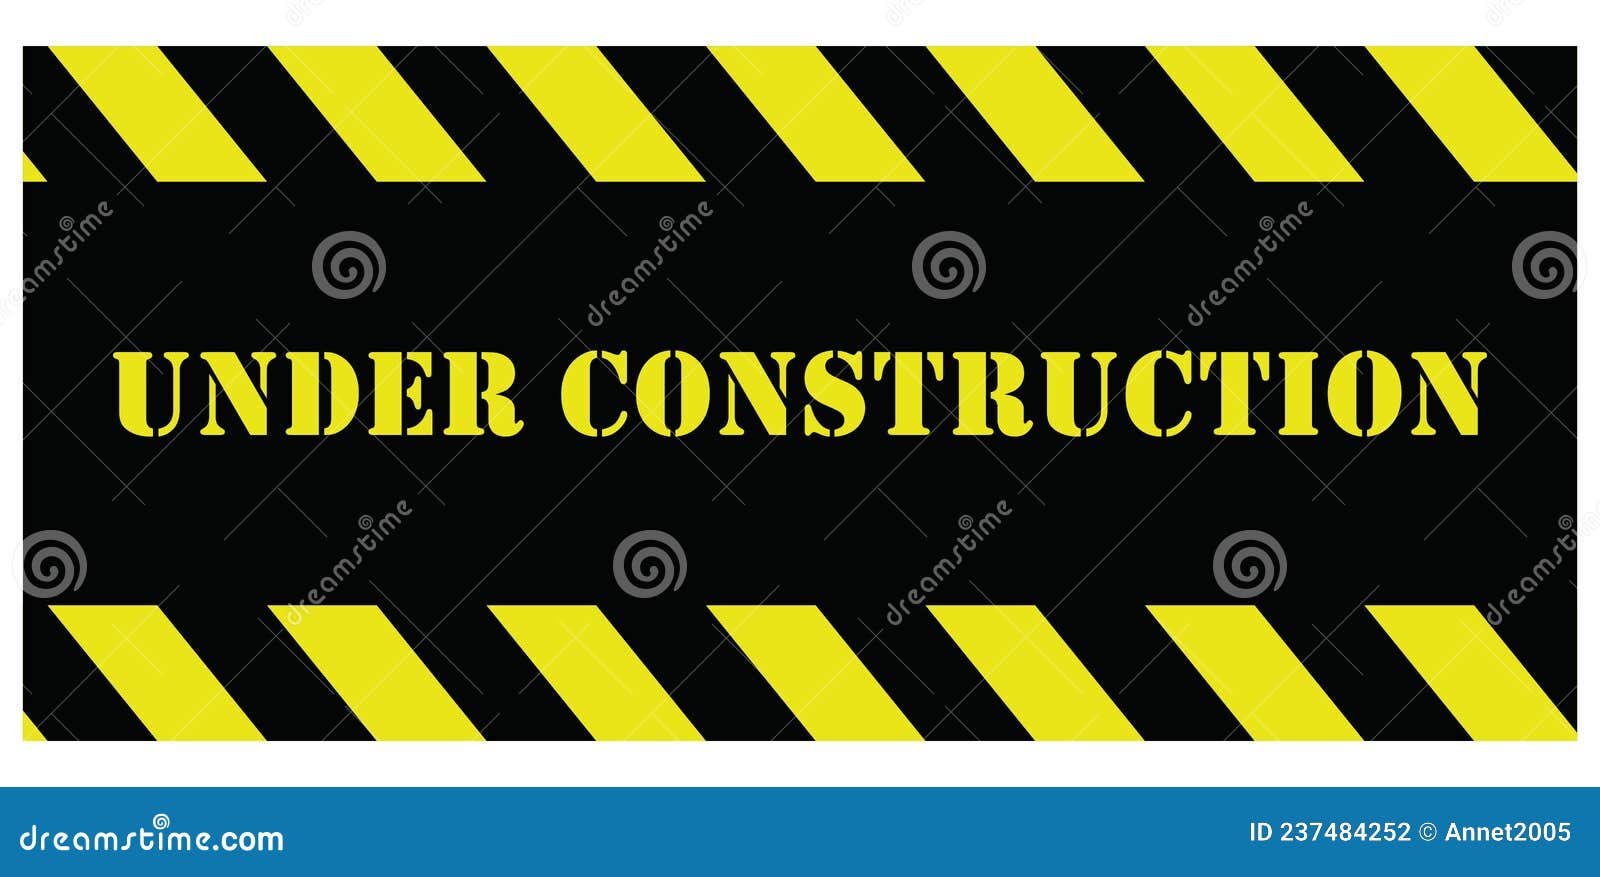 Under Construction Sign, Text on Black Yellow Striped Border Banner ...